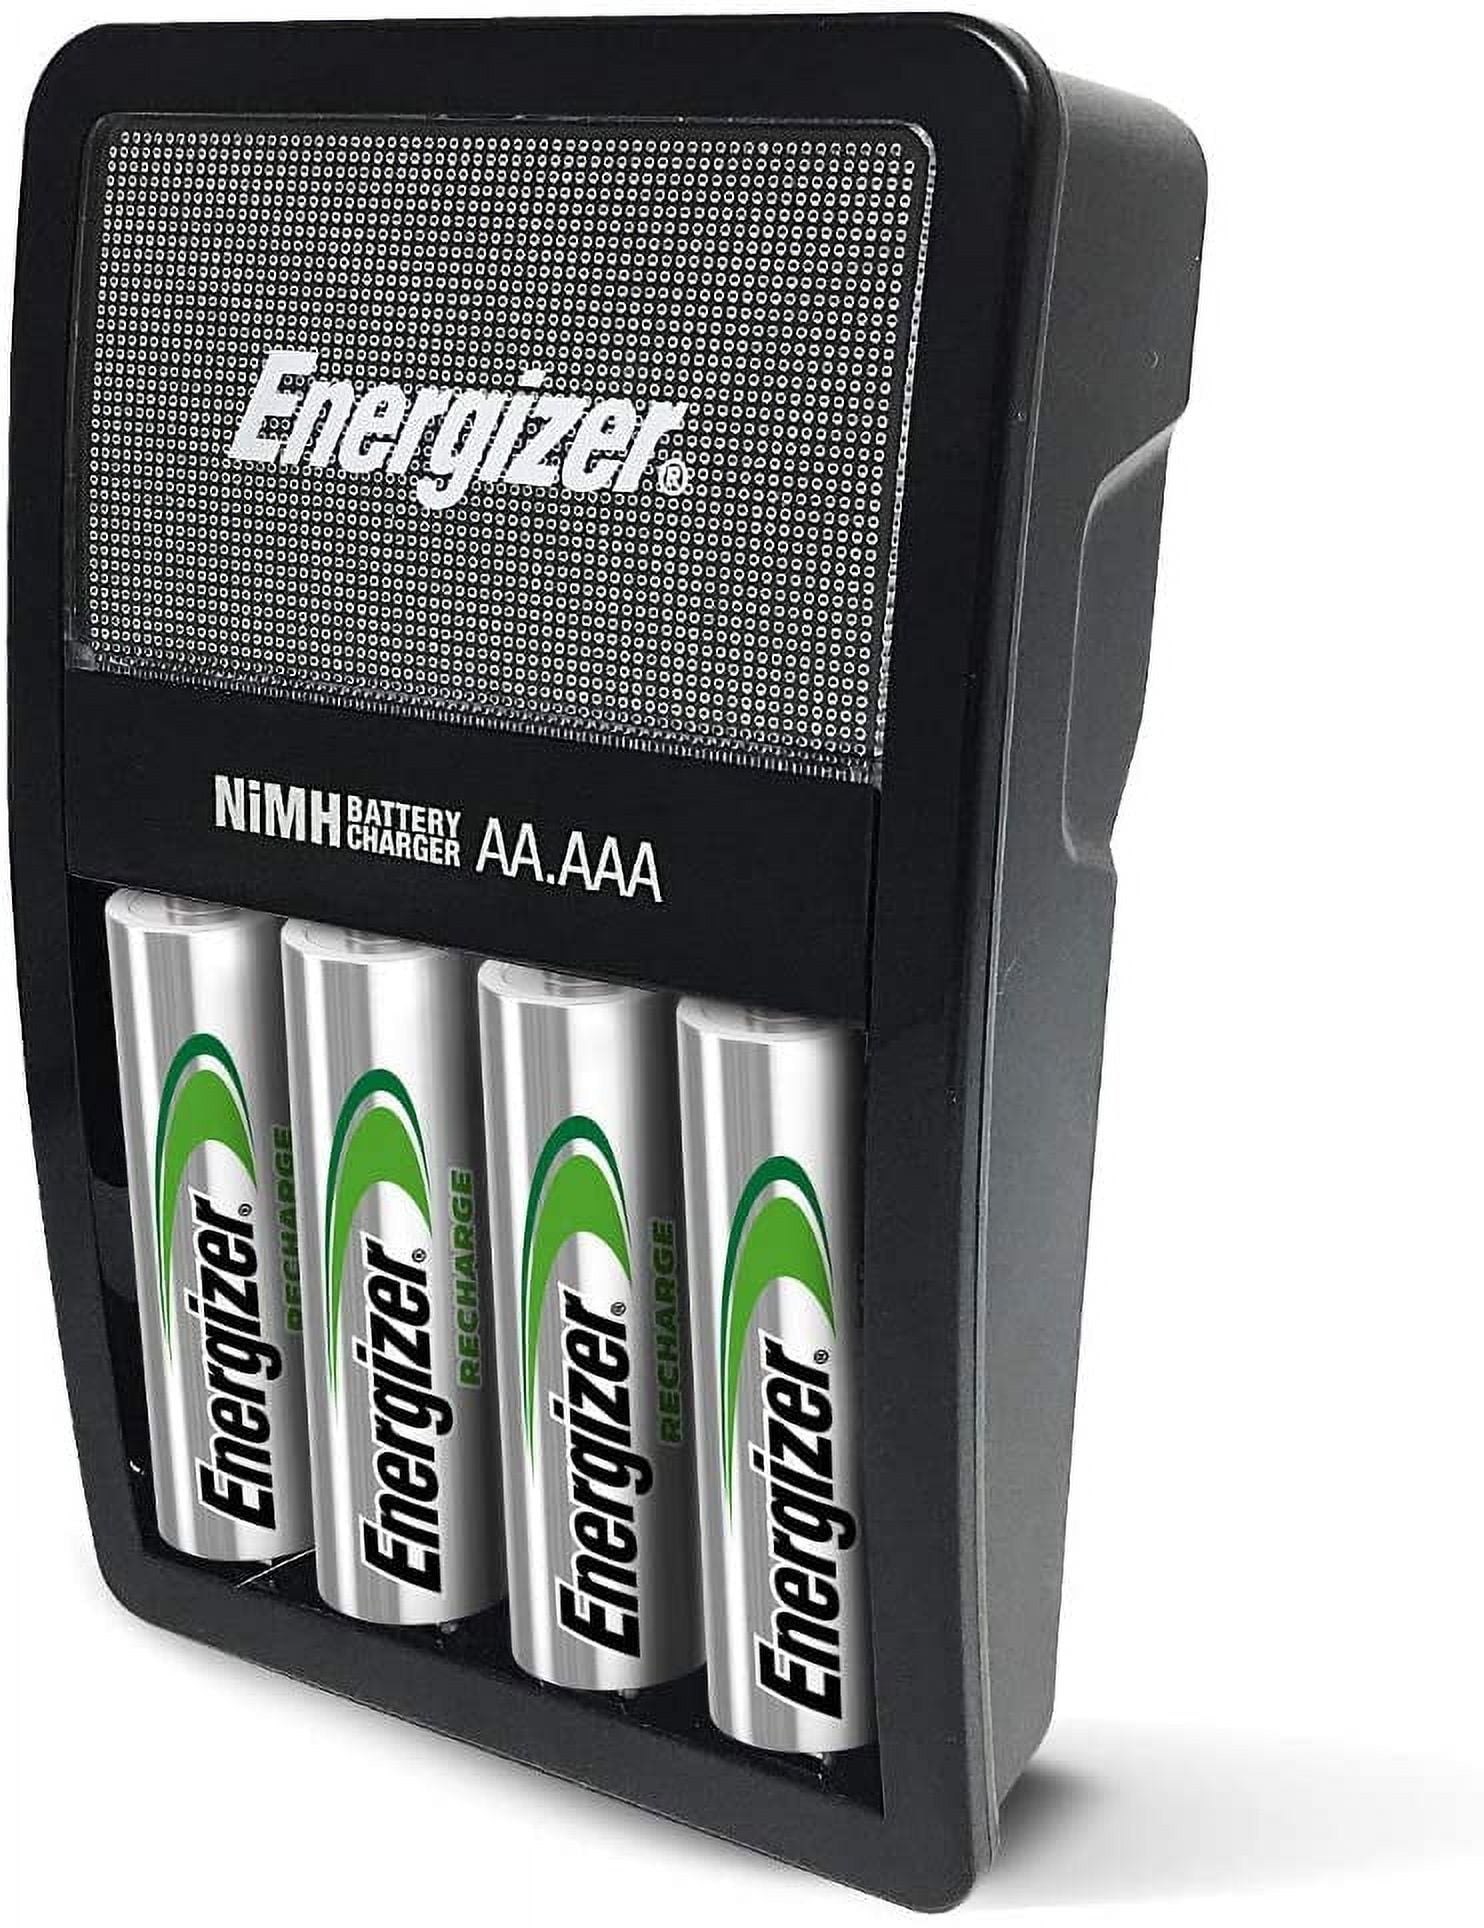 Energizer Recharge 1-Hour Charger for NiMH Rechargeable AA and AAA Batteries  CH1HRWB-4 - Best Buy